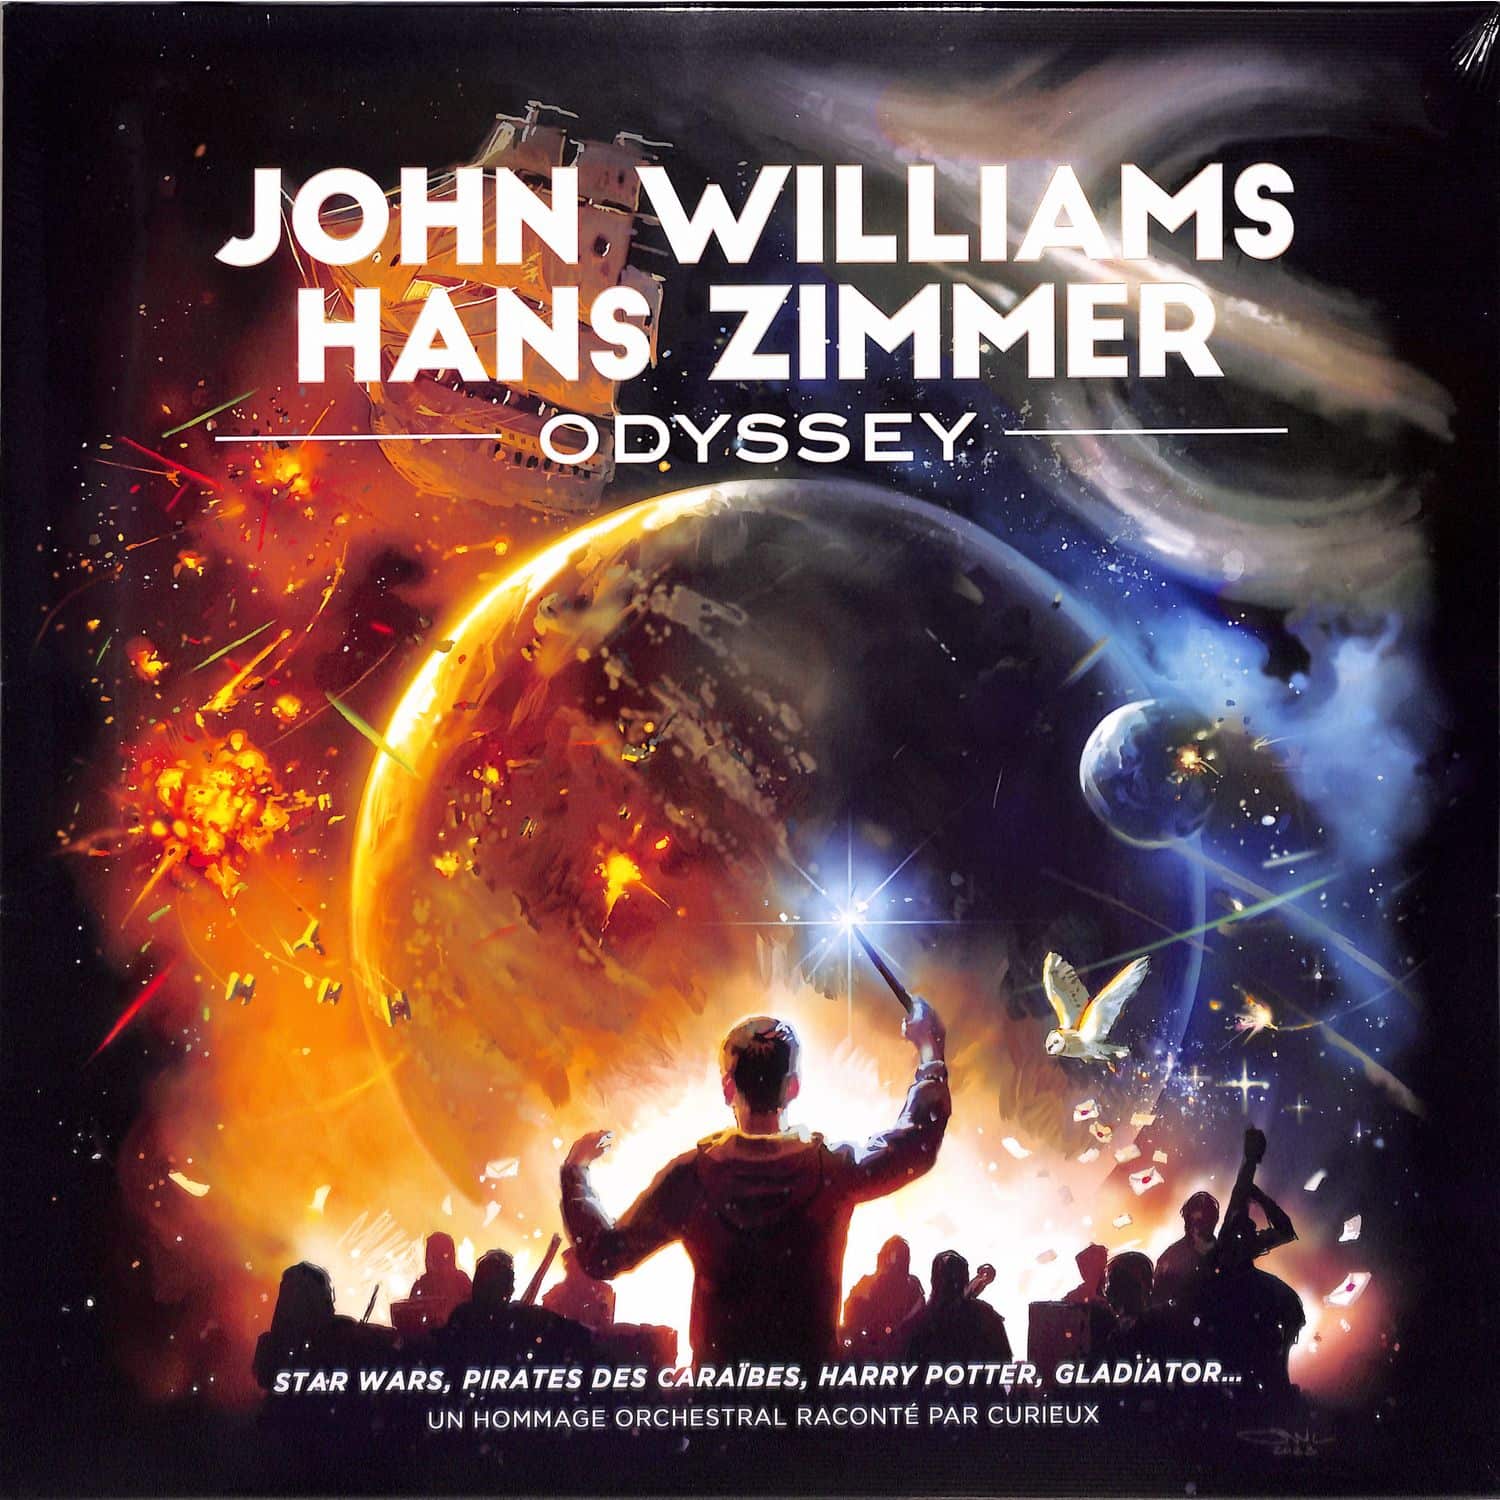 Orchestre Curieux - JOHN WILLIAMS & HANS ZIMMER ODYSSEY 